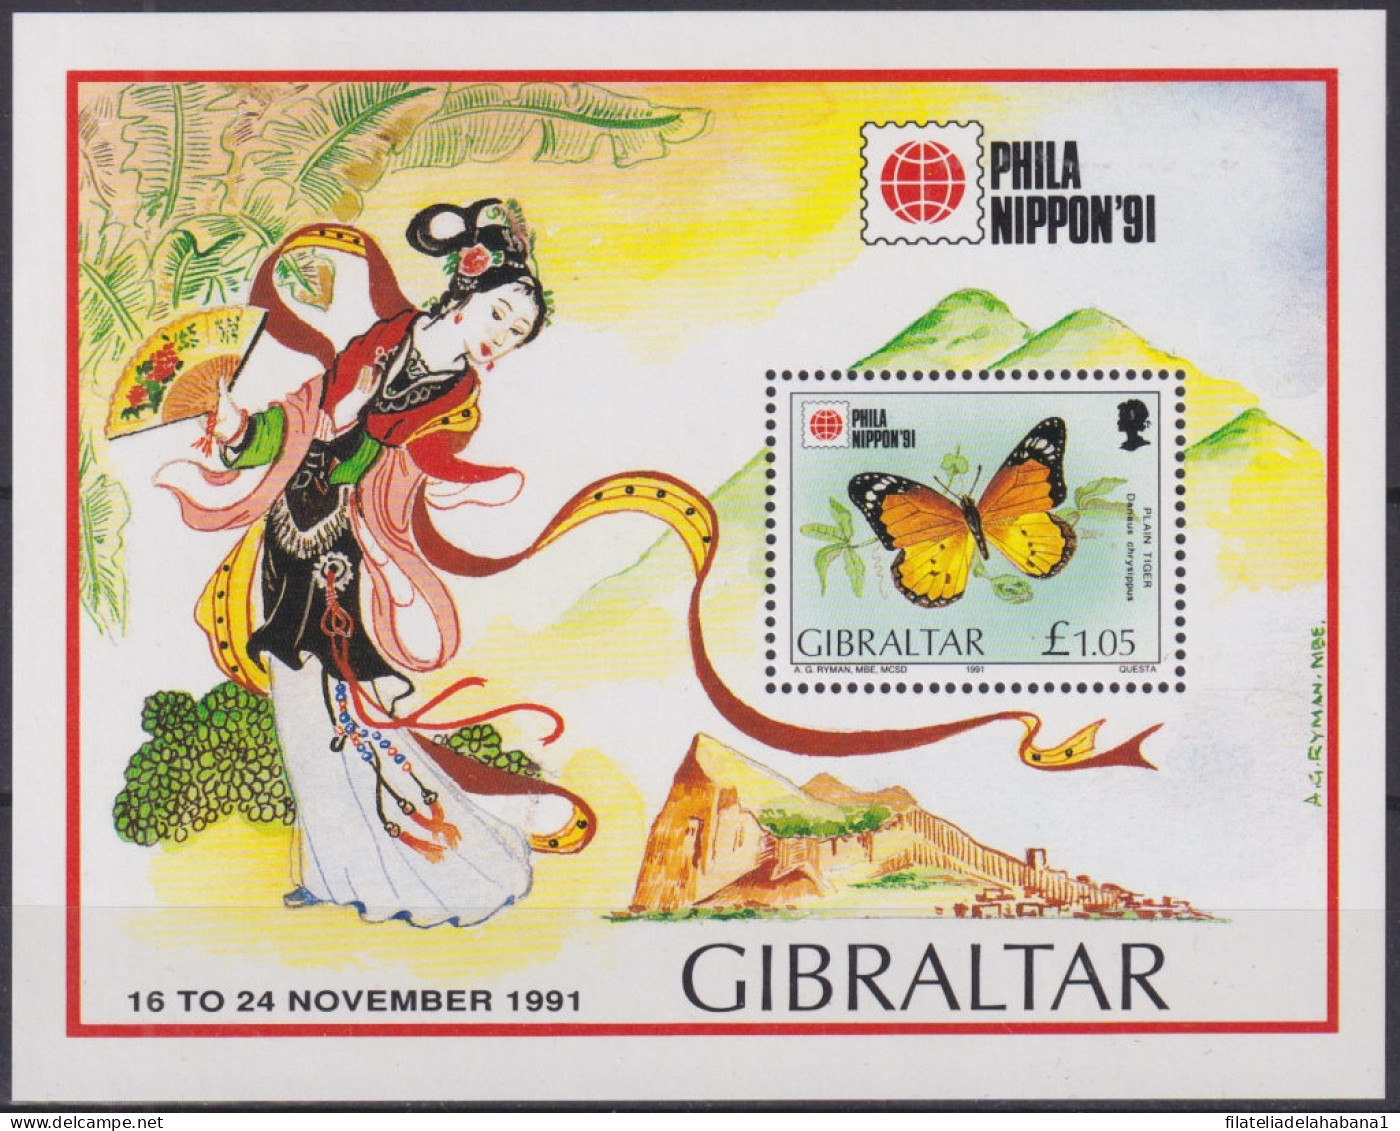 F-EX48304 GIBRALTAR MNH 1991 BUTTERFLIES INSECTS’ MARIPOSAS PAPILLON PHILANIPPON.  - Vlinders